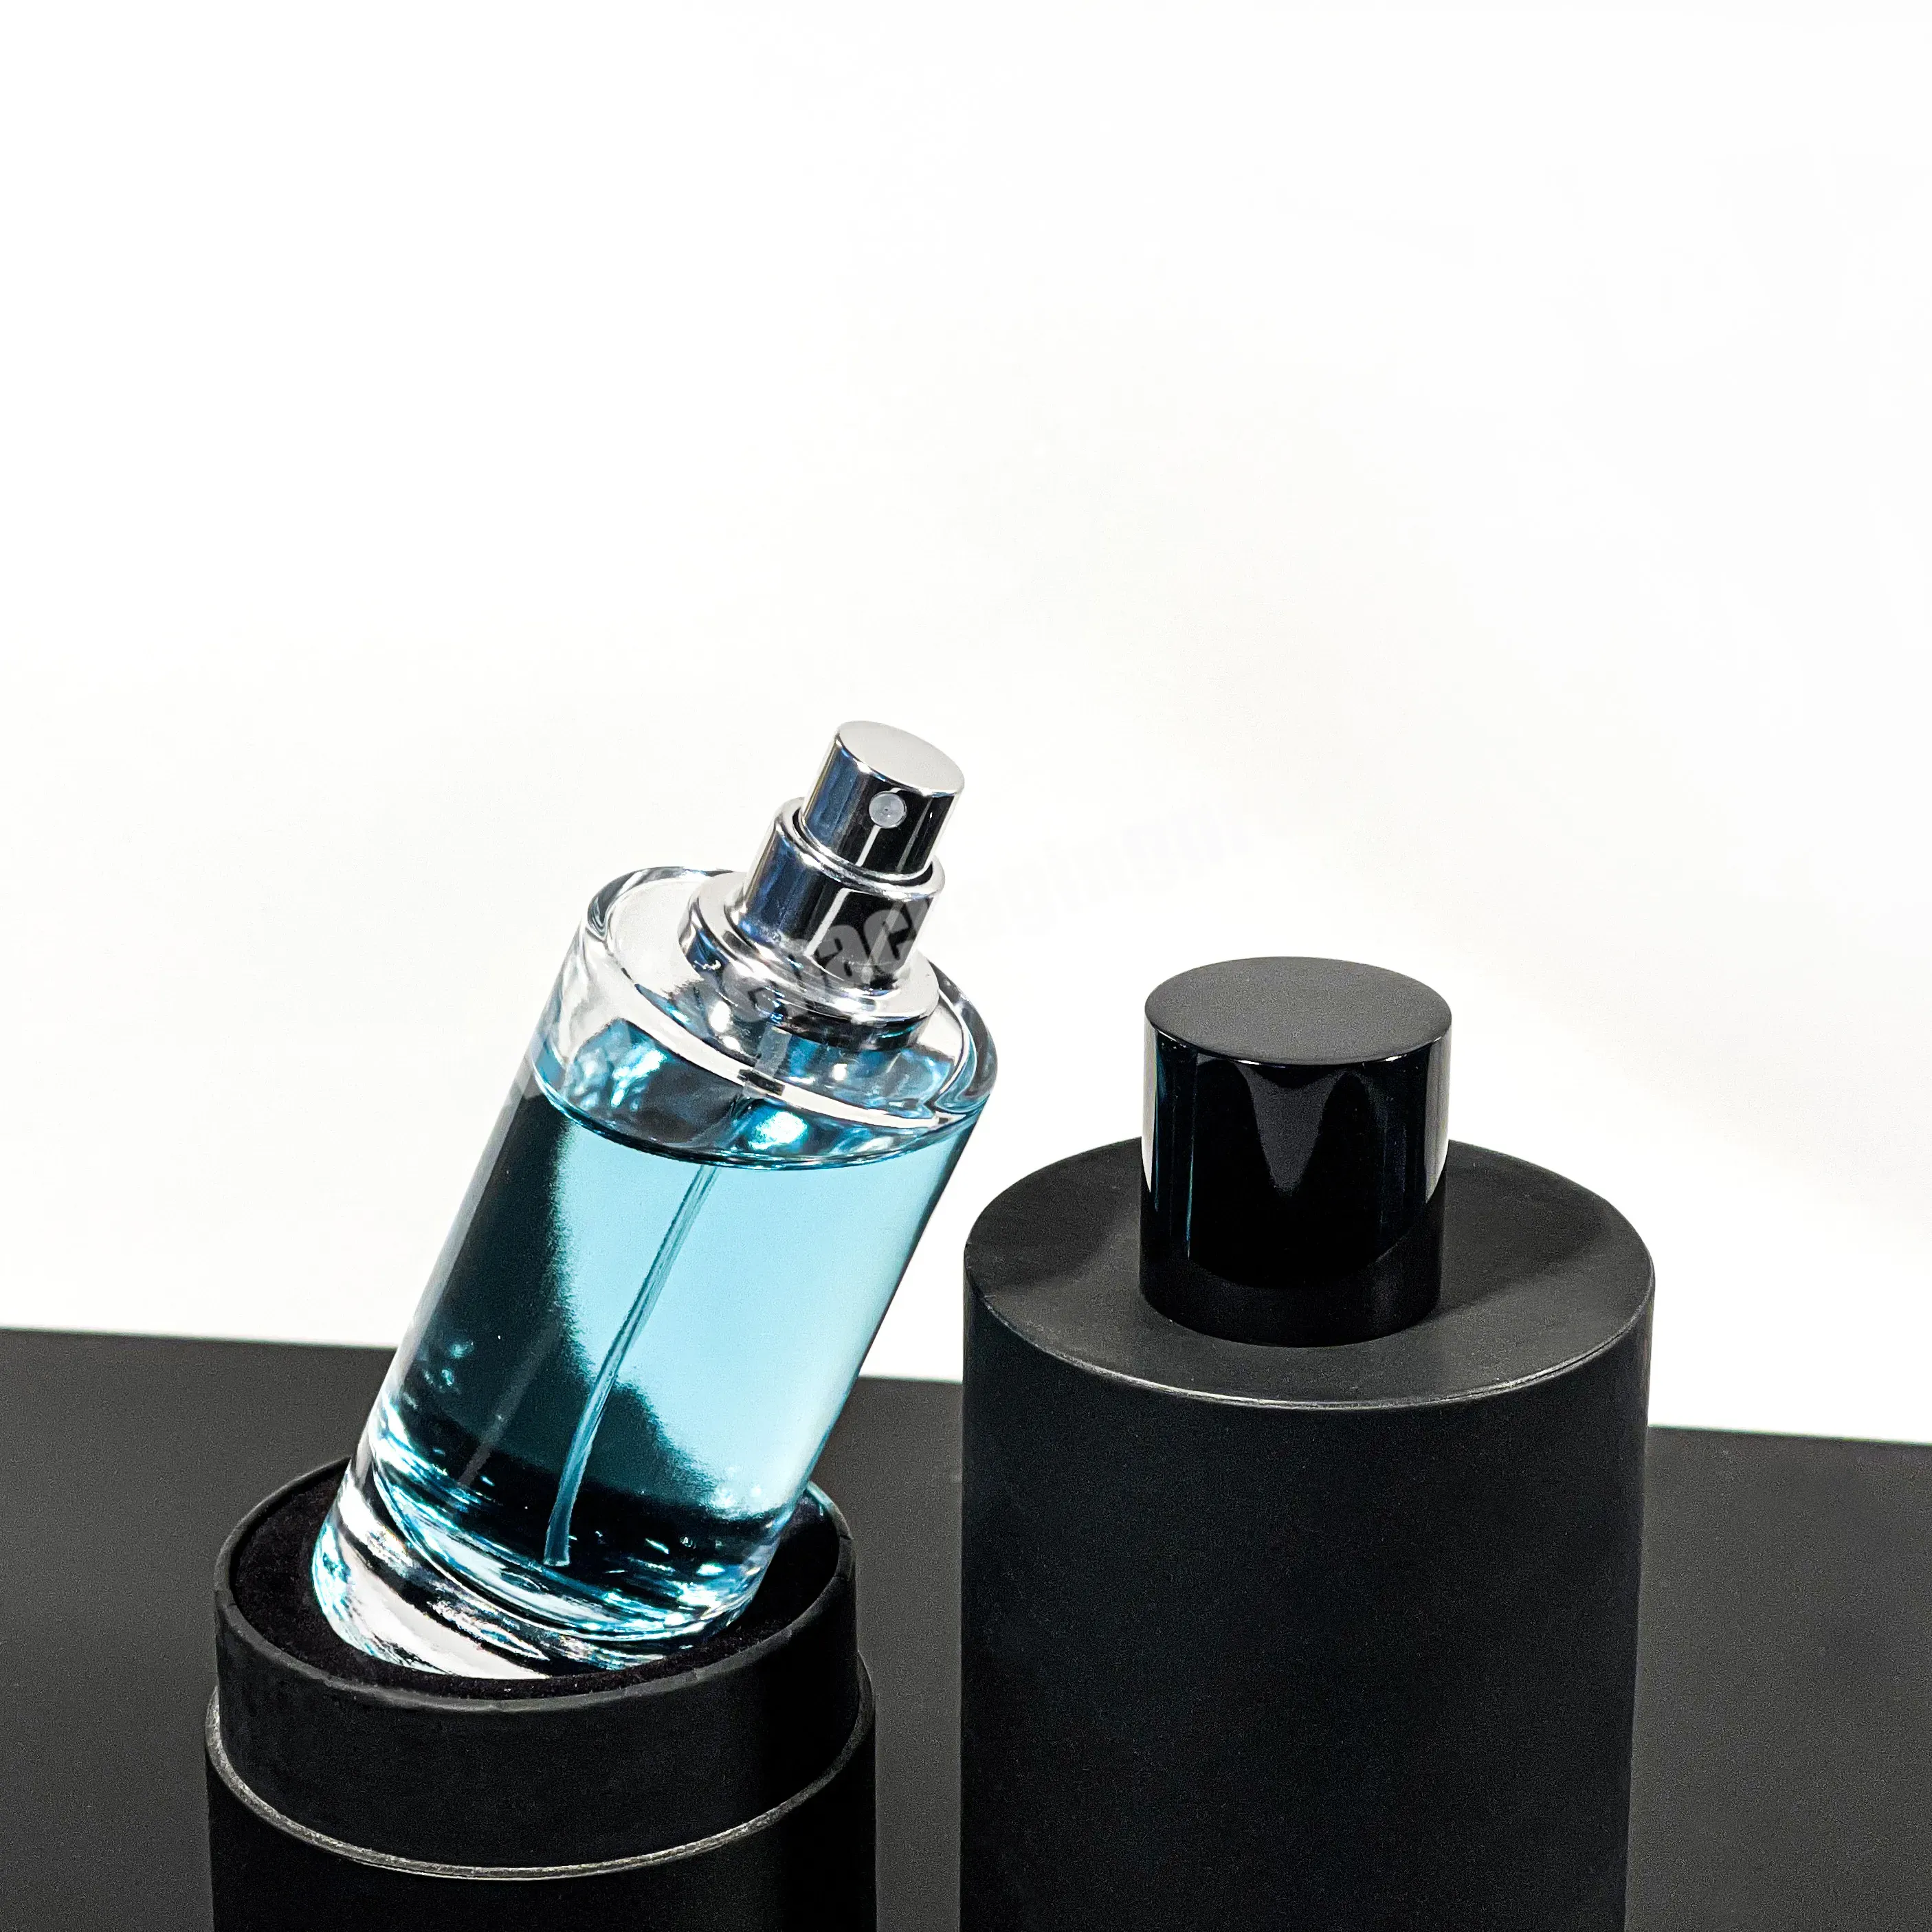 Perfume Bottle With Set Sample Packaging Box Competitive Price Cosmetics And Perfume Gift Box Packaging Oem - Buy Print Rigid Perfume Bottle Gift Box,Sample Packaging Box Competitive Price,Cosmetic Packaging Box Perfume Bottle With Magnetic Cap.